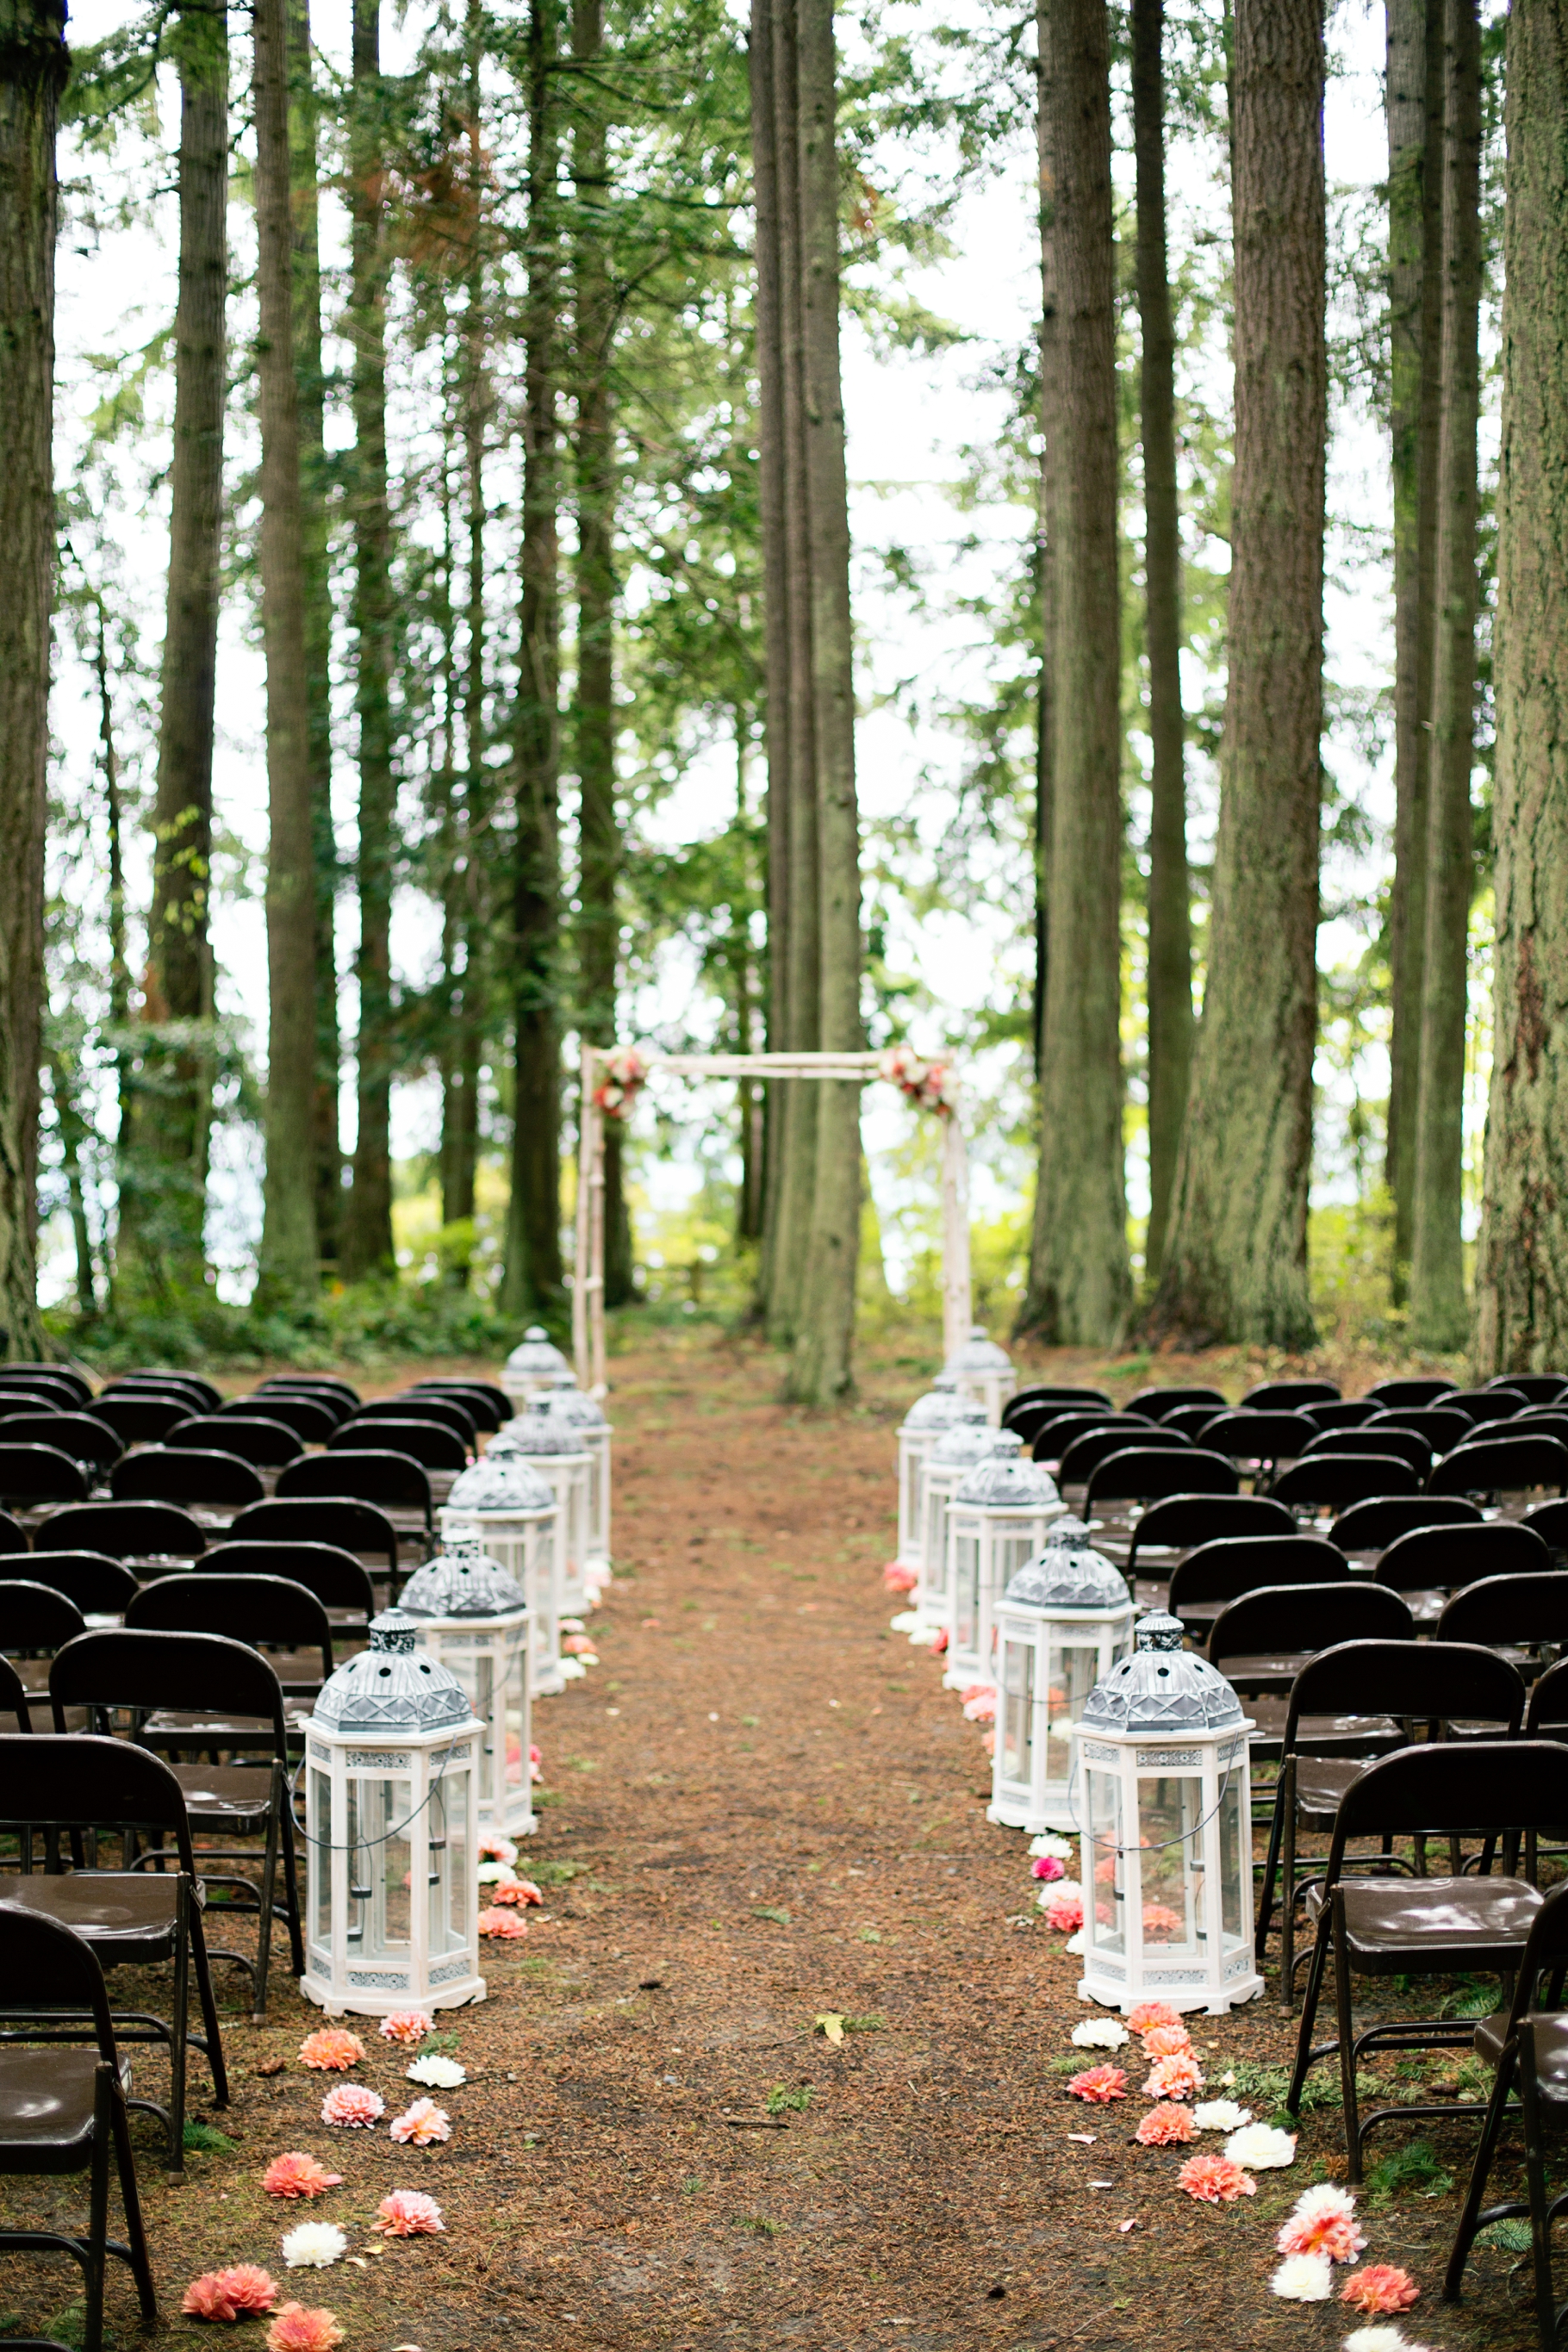 28-Ceremony-Lantern-lined-Aisle-Chuppah-Birch-Tree-Branches-Arbor-wooded-bluff-olympic-mountains-Kitsap-Memorial-State-Park-Forest-Northwest-Photographer-Seattle-Wedding-Photography-by-Betty-Elaine